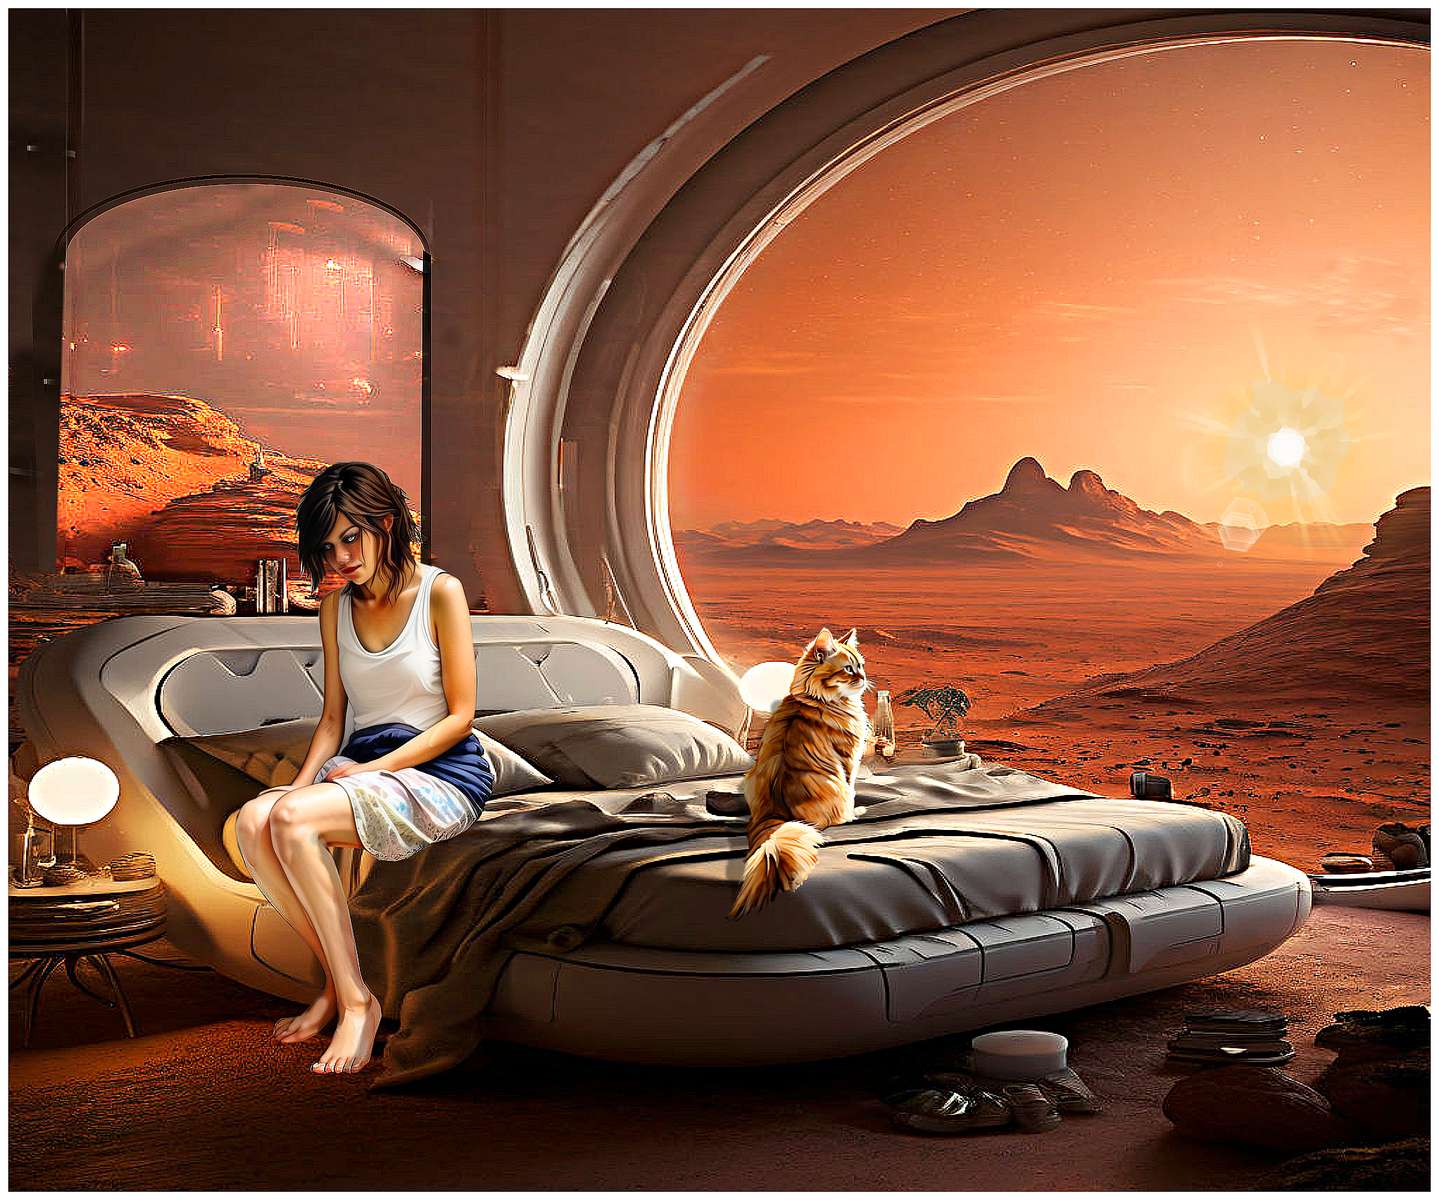 Life on Mars jigsaw puzzle online